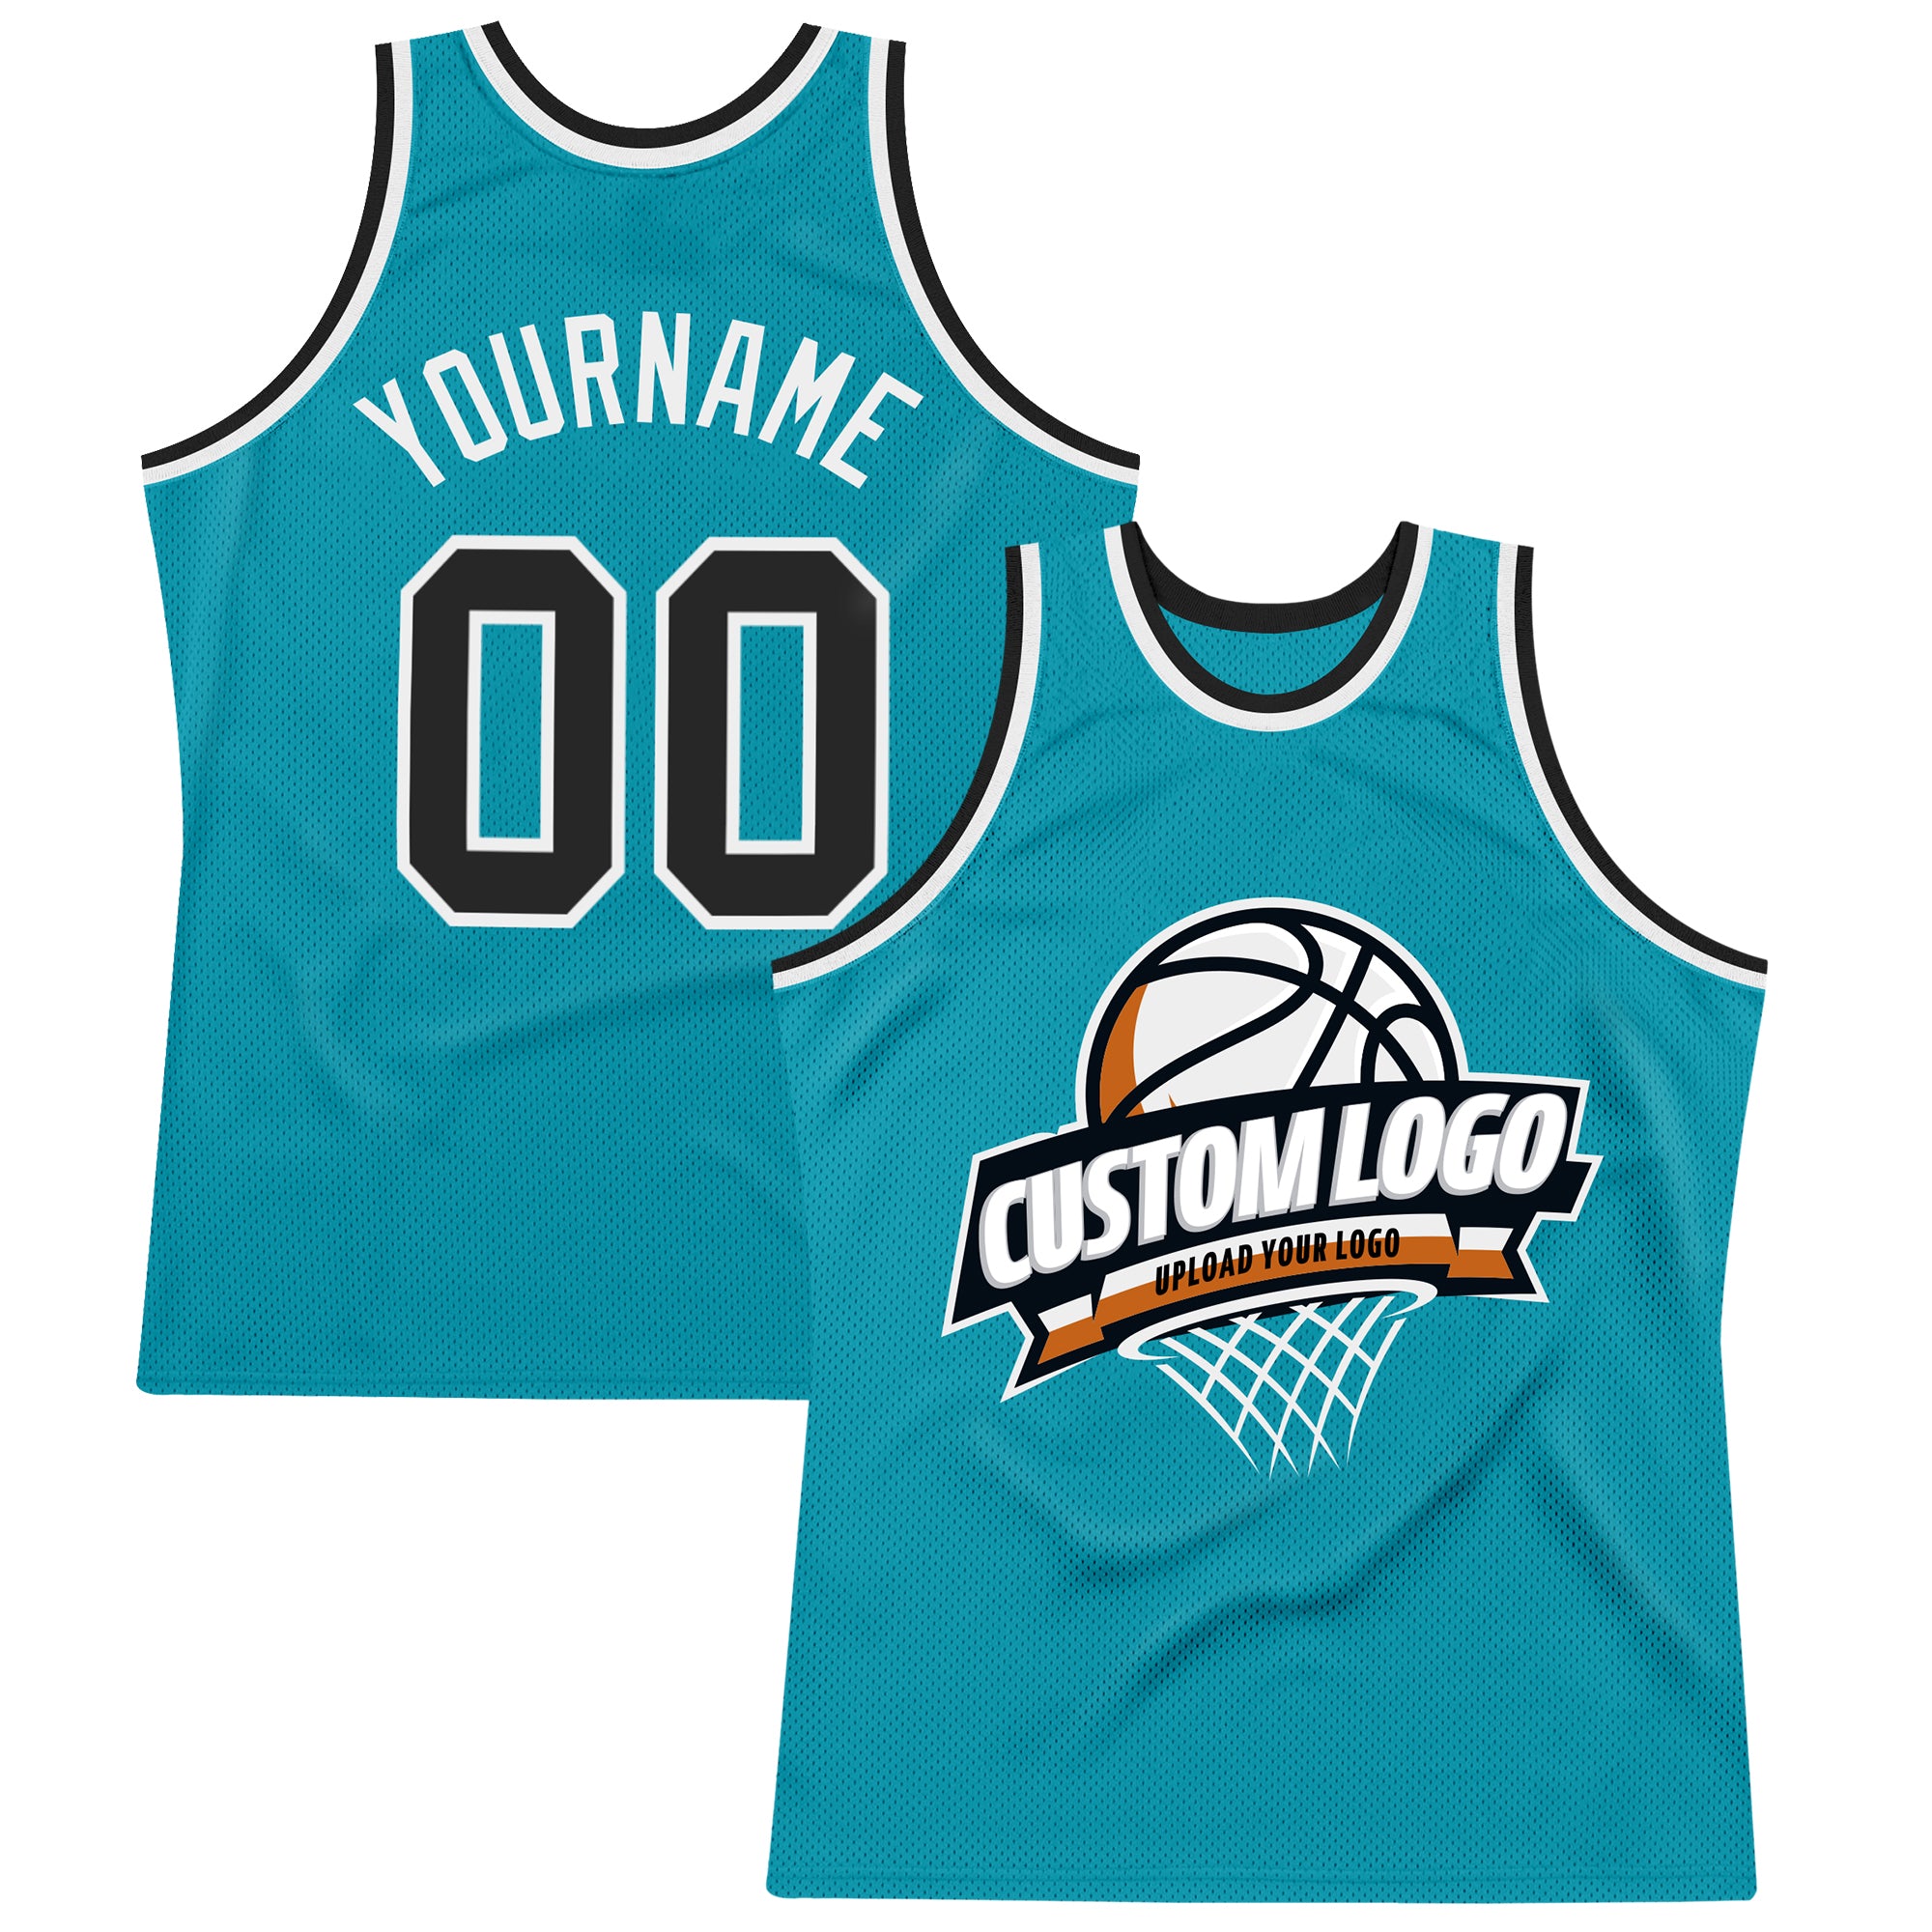 FIITG Custom Basketball Jersey Teal White-Black Authentic Throwback Men's Size:L